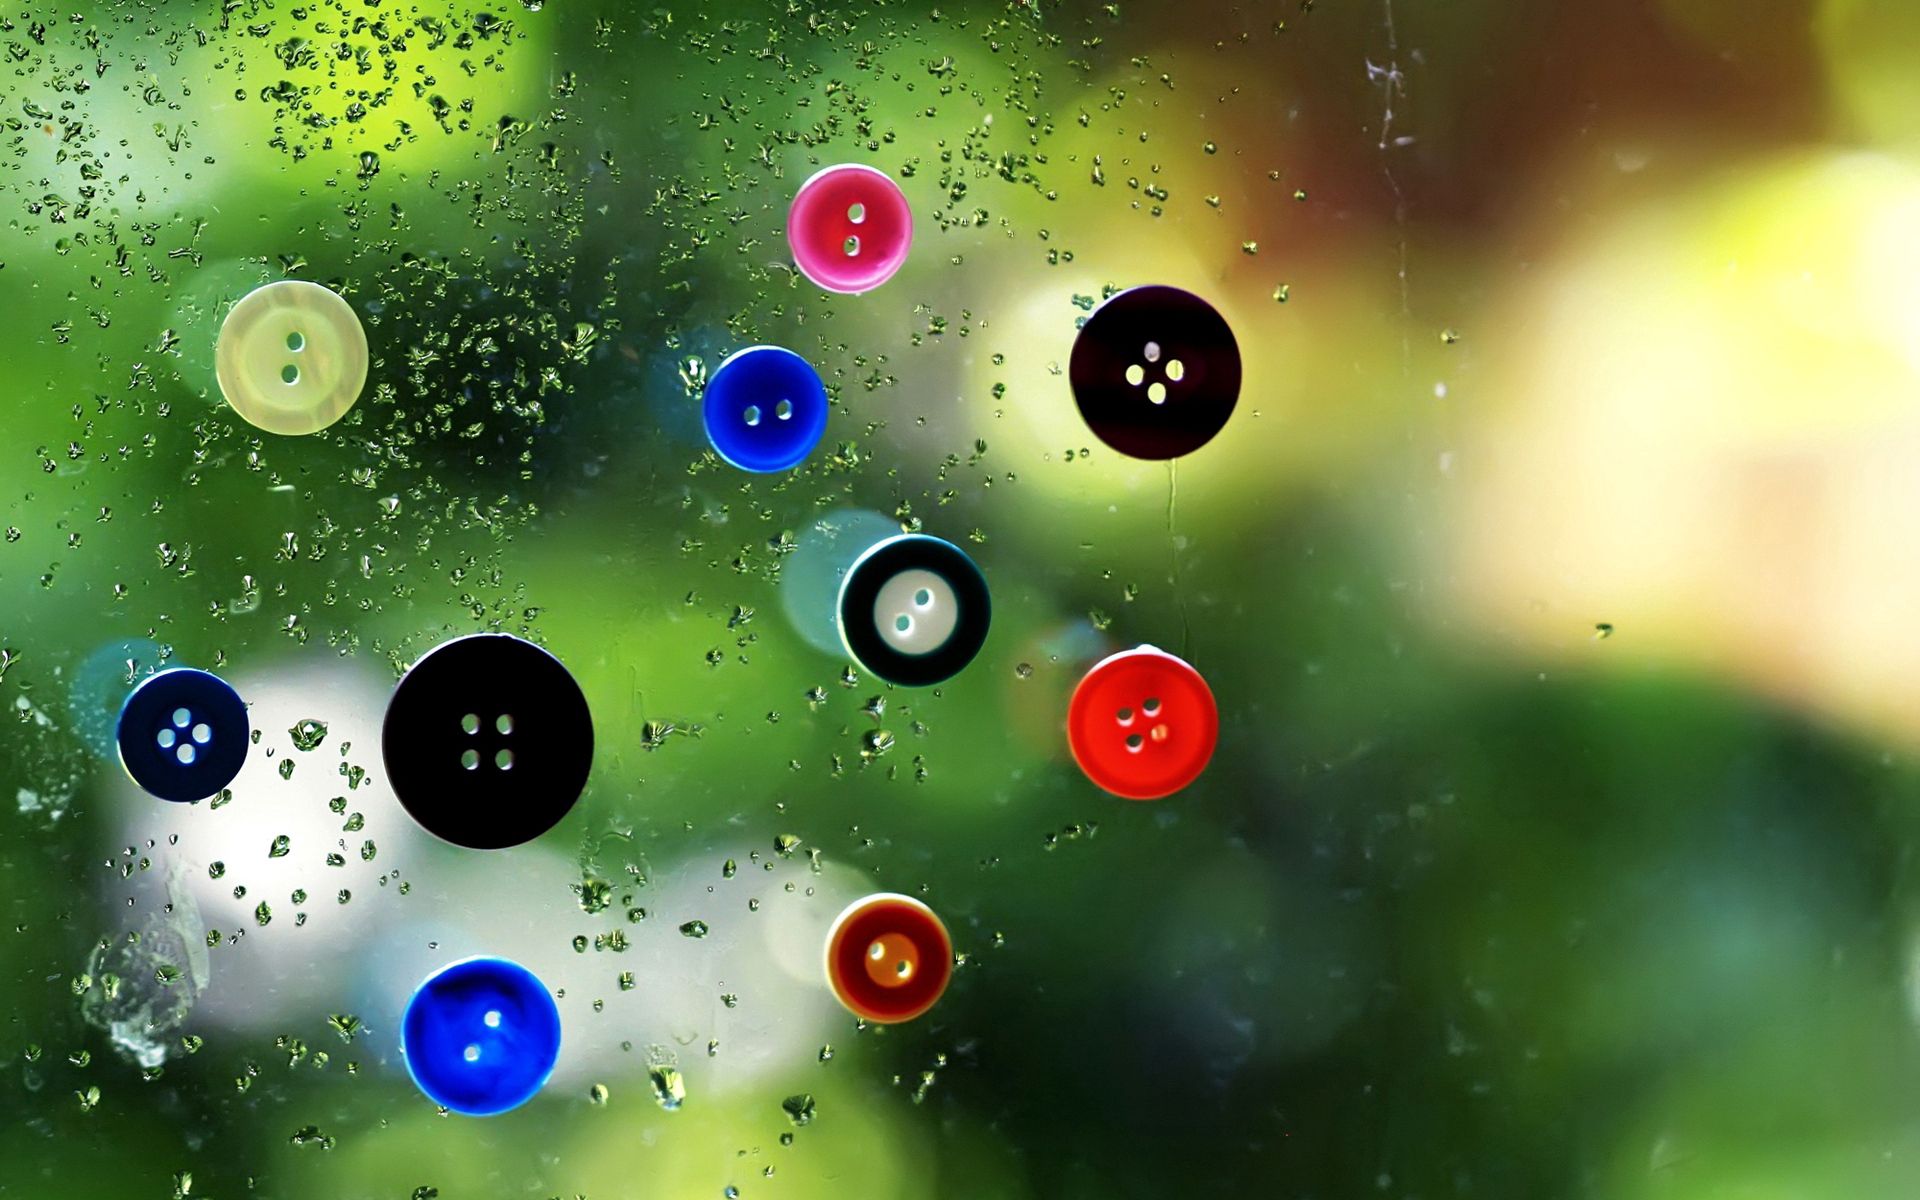 surface, miscellanea, miscellaneous, multicolored, motley, wet, buttons, humid